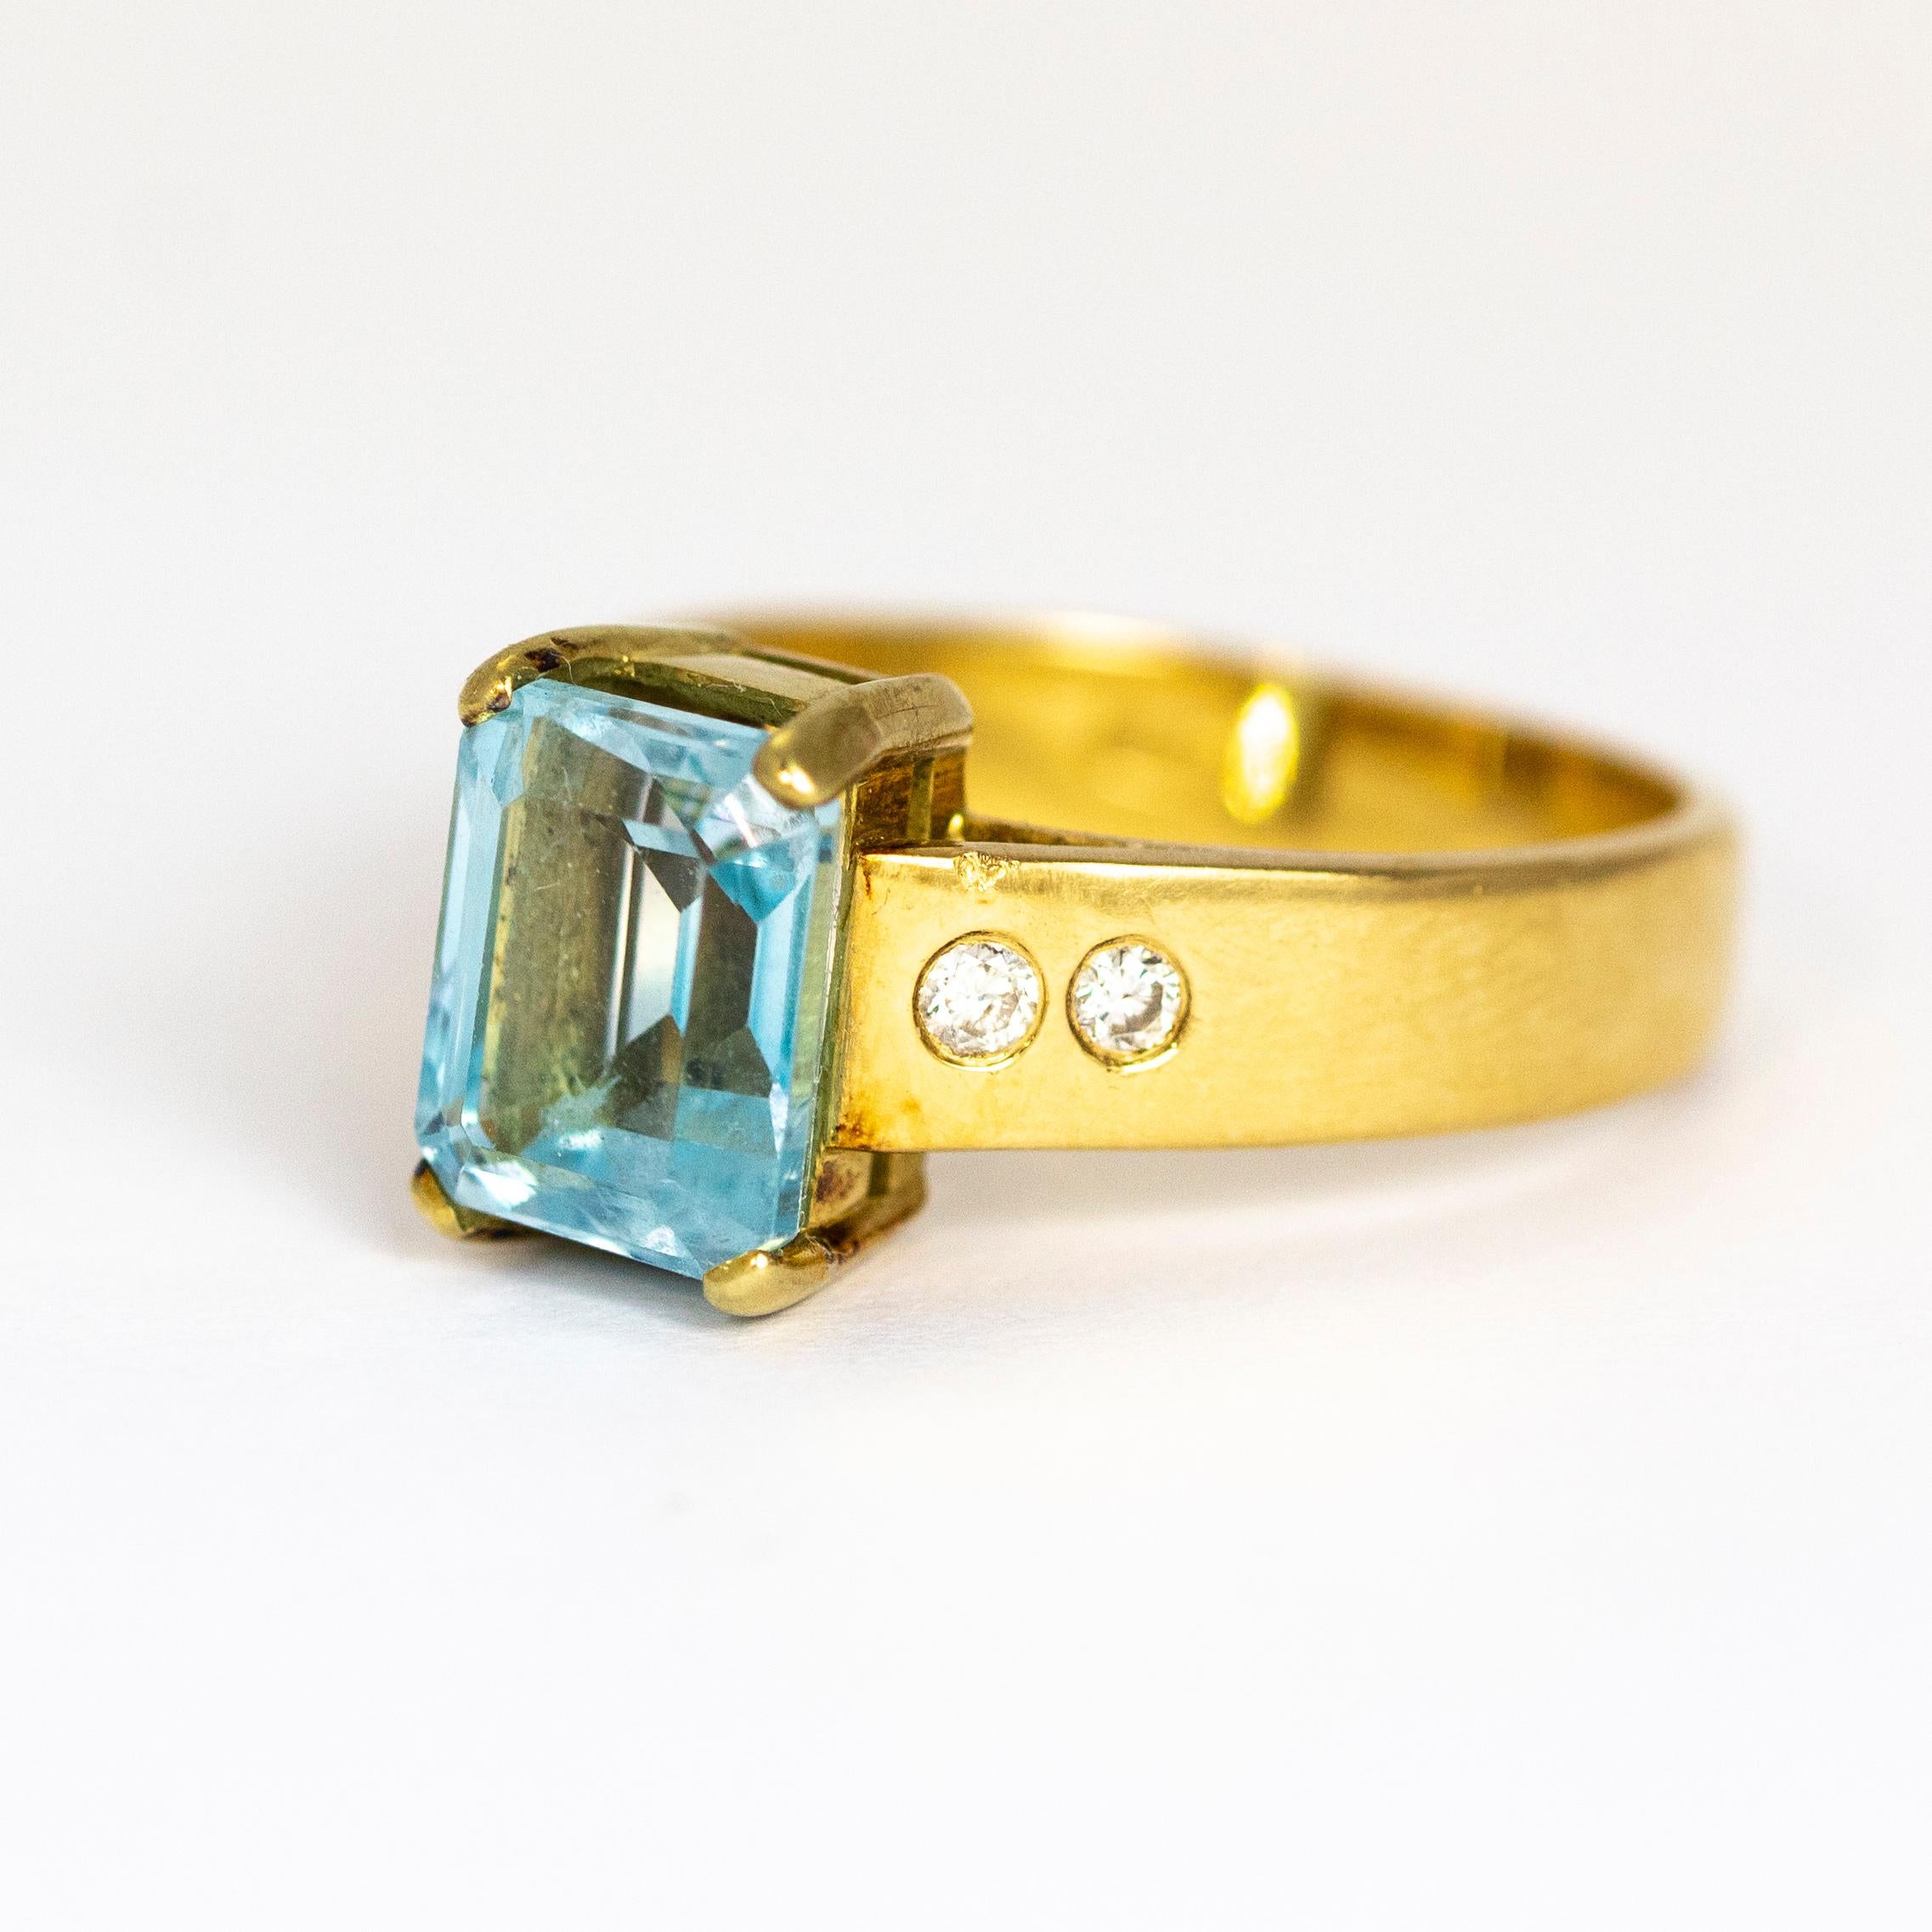 This superb vintage ring is set with a beautiful emerald cut aquamarine in a four claw setting. The shoulders of the chunky band are each set with two round white diamonds. Modelled in 18 karat yellow gold

Ring Size: UK R 1/2, US 9

Stone Height: